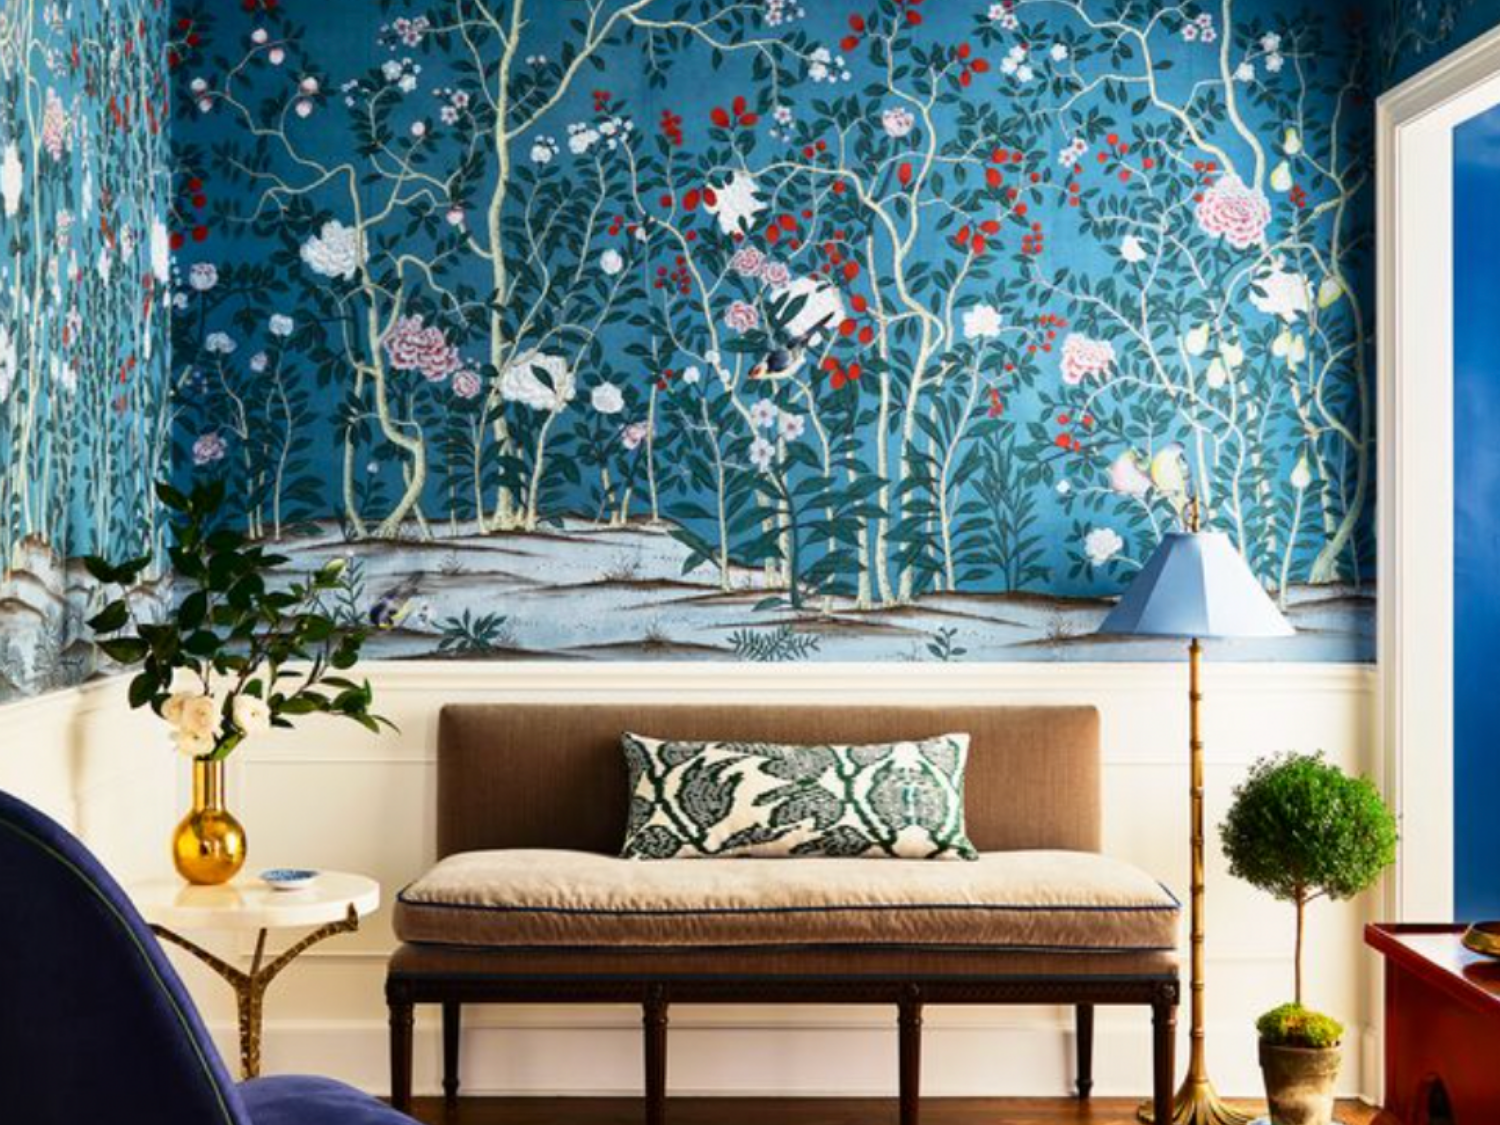 Example of eclectic natured inspired interior design in sitting room with floral wallpaper